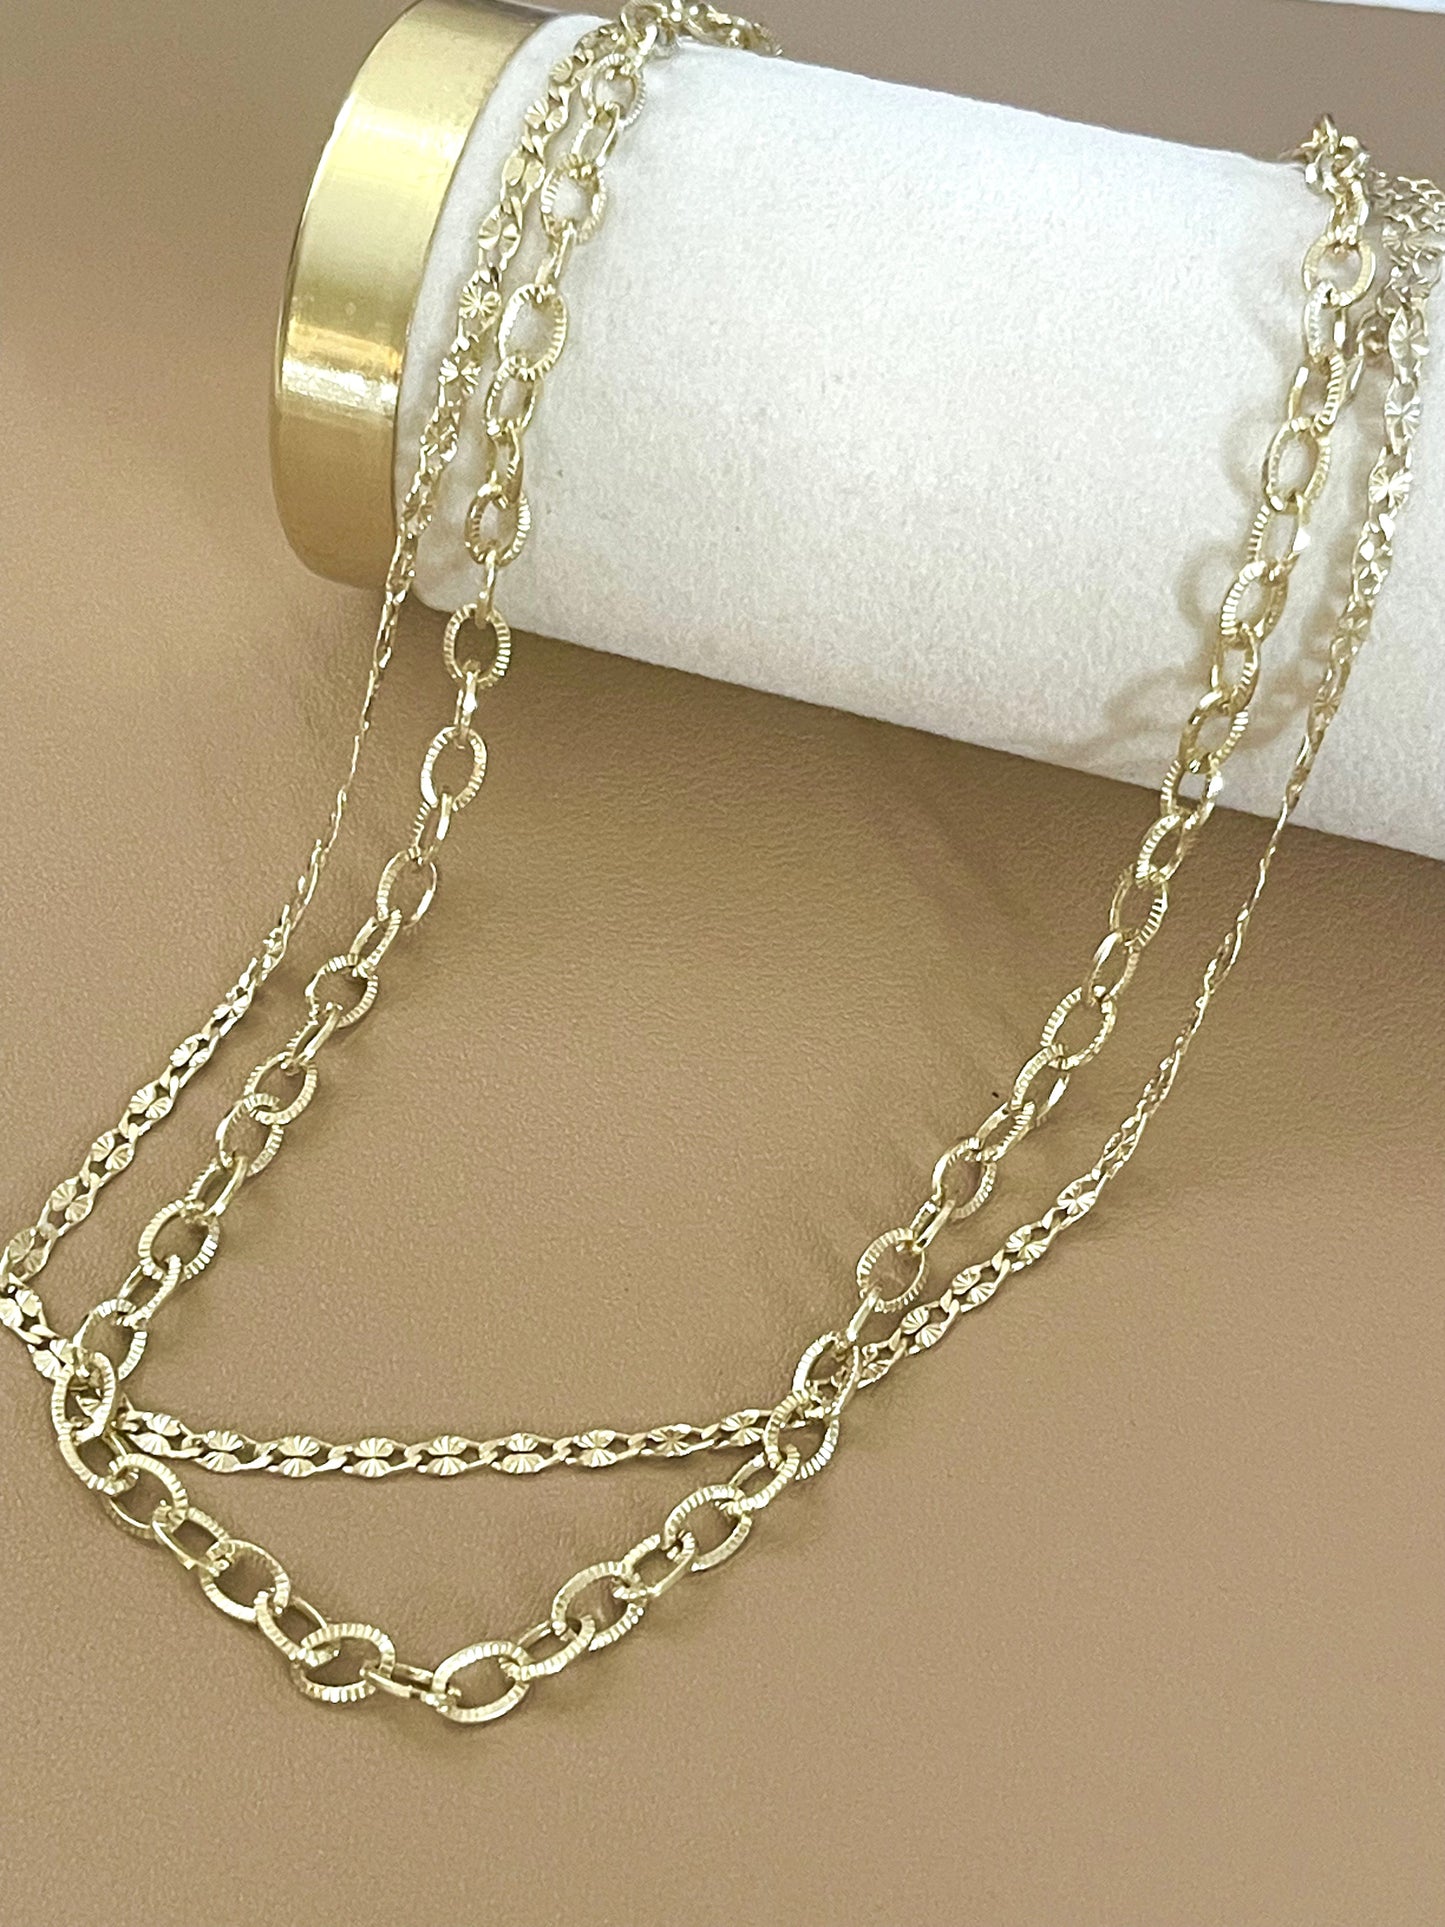 Two layered chain